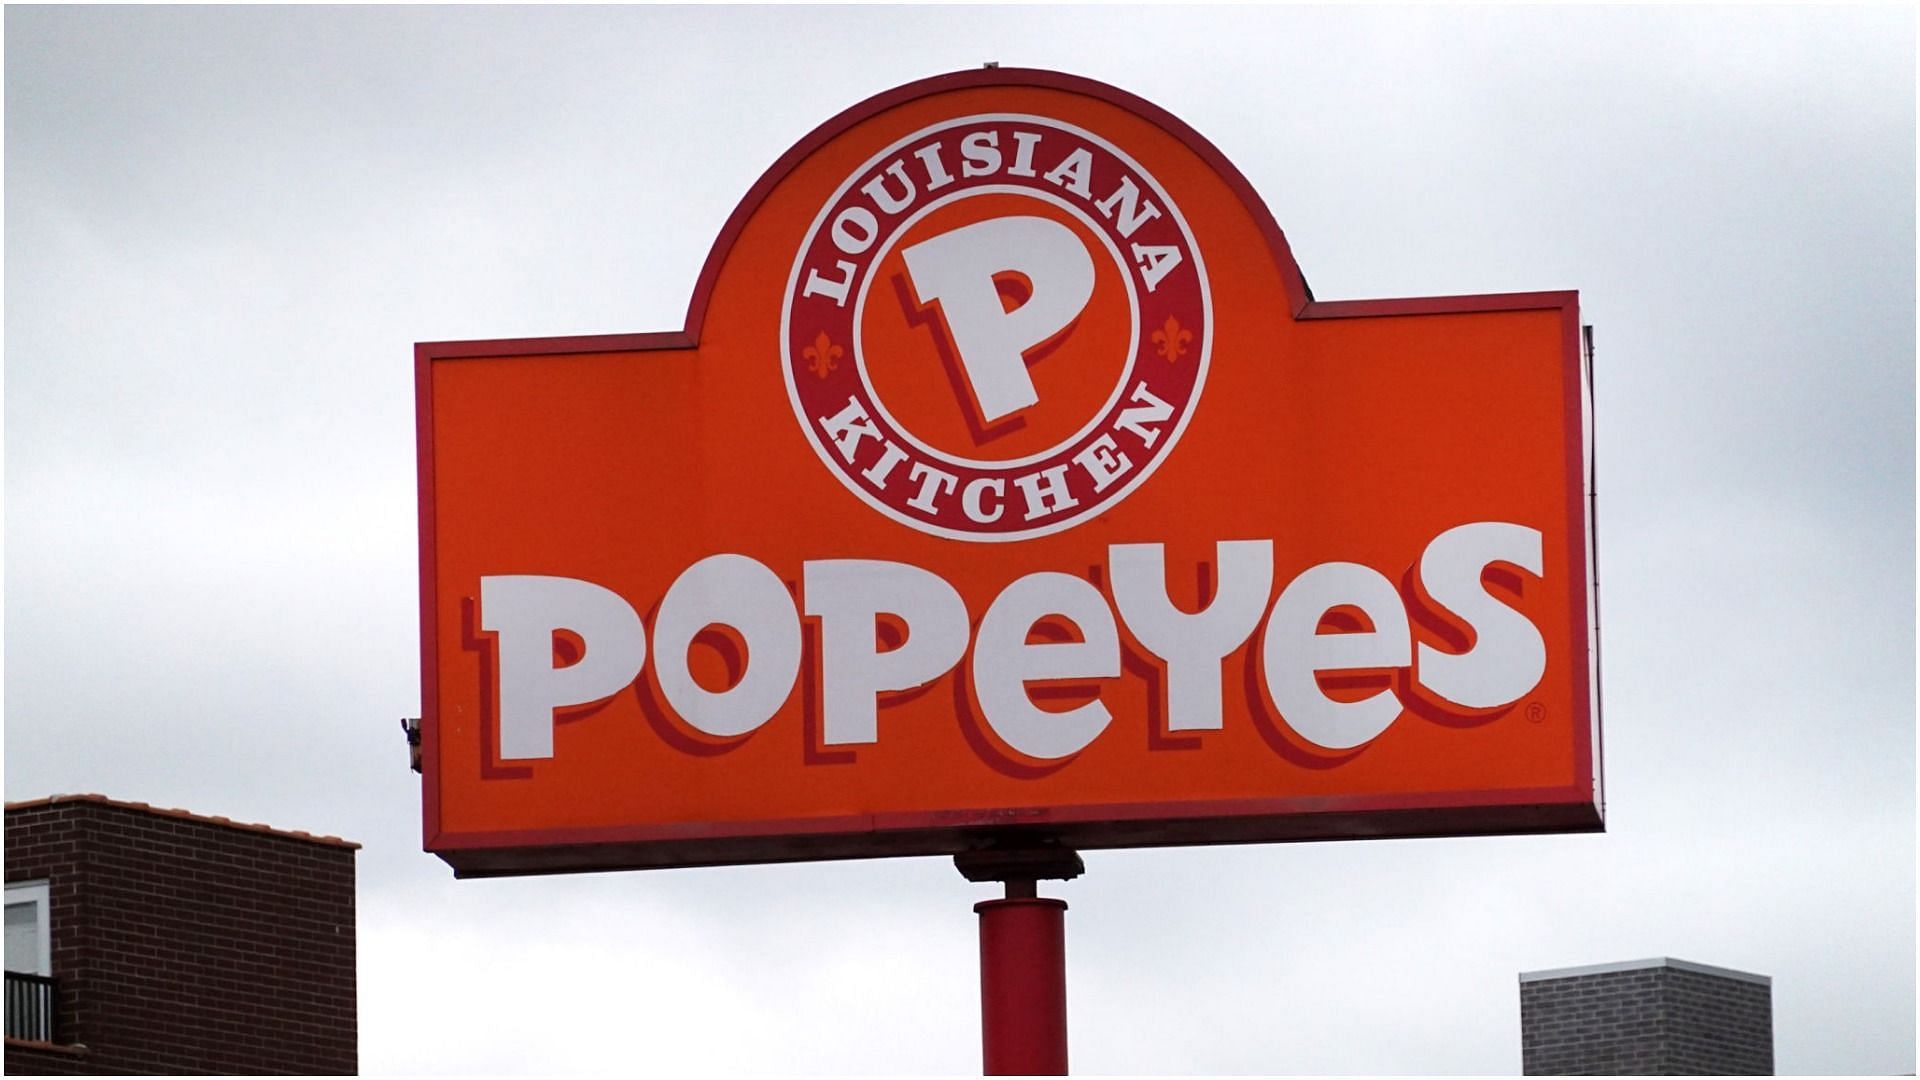 Popeyes&#039; latest decision has been criticized by a few on Twitter (Image by Scott Olson via Getty Images)